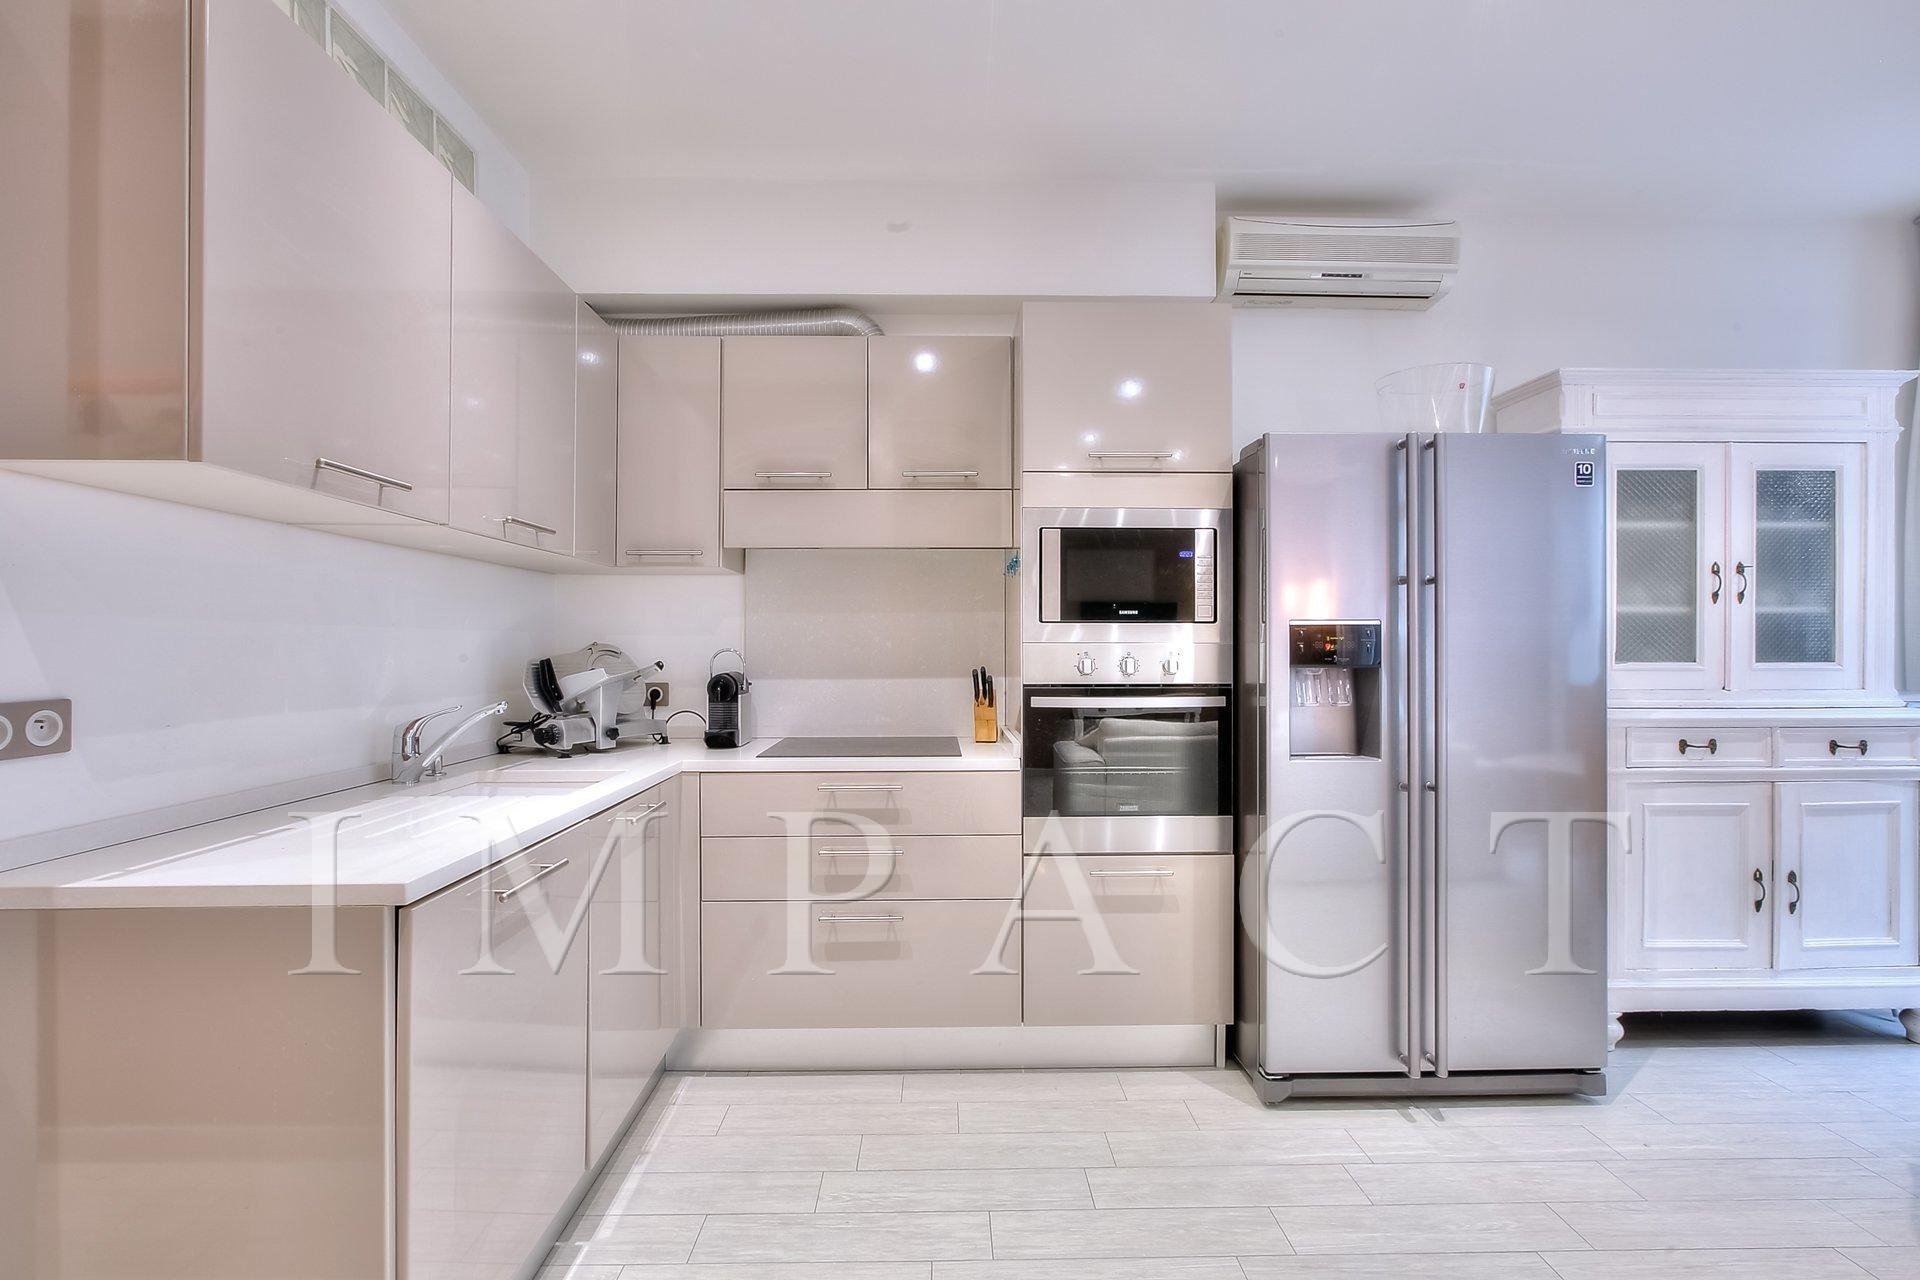 2-bedroom apartment to rent with large terrace in the center of Cannes.